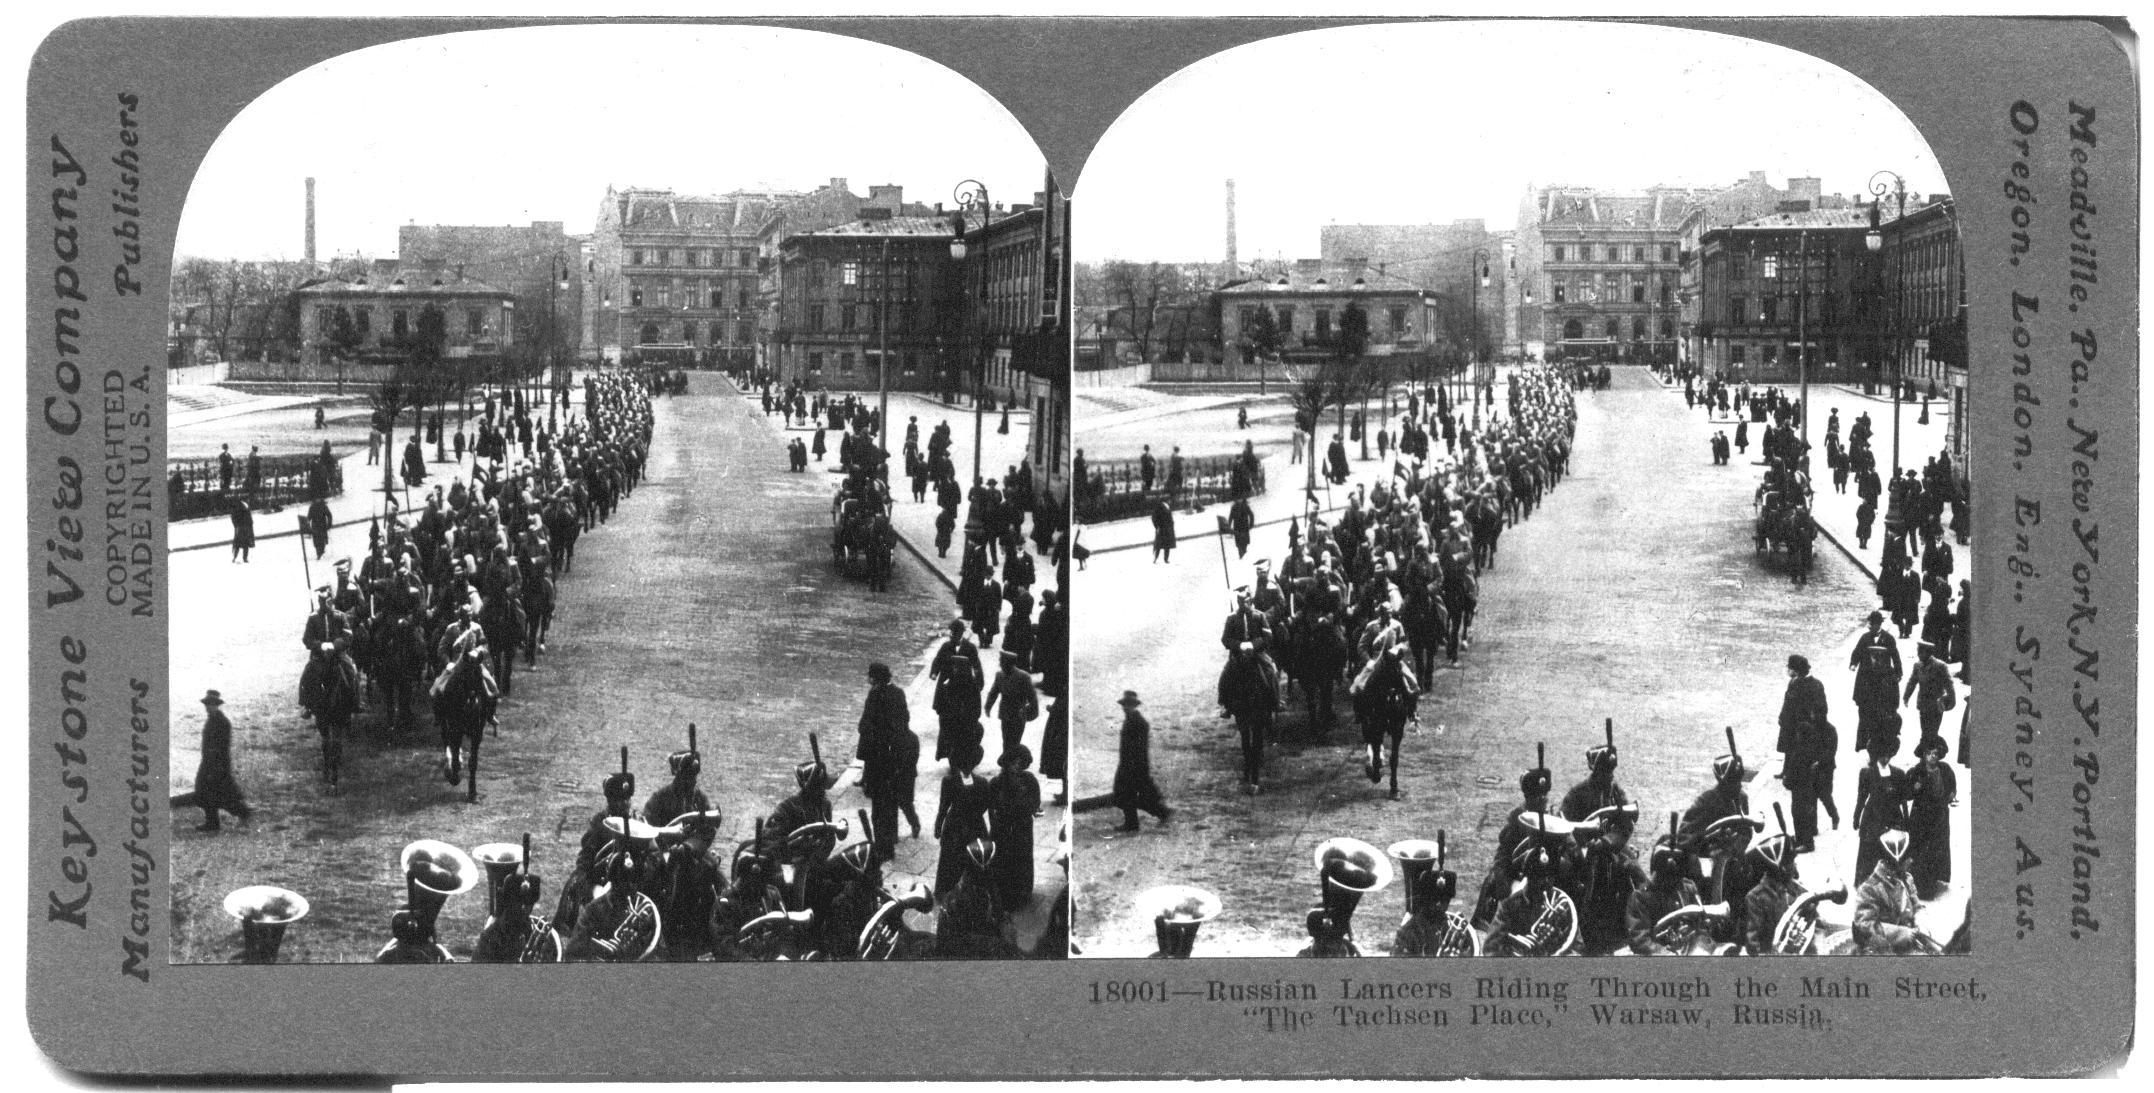 Russian Lancers Riding Through the Main Street, "The Tachsen Place," Warsaw, Russia